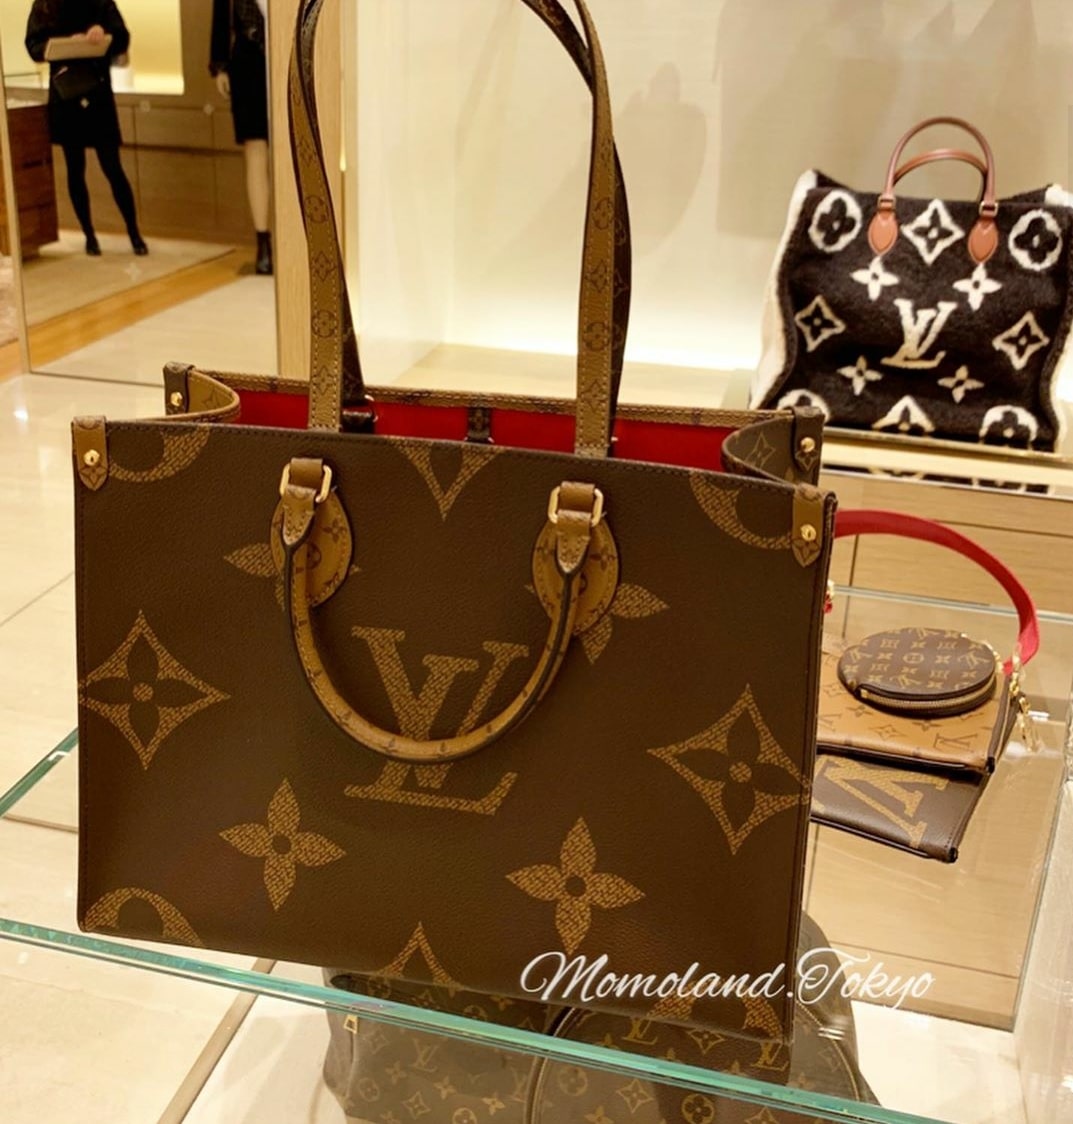 LOUIS VUITTON ON THE GO - MM Size (Is it worth the price